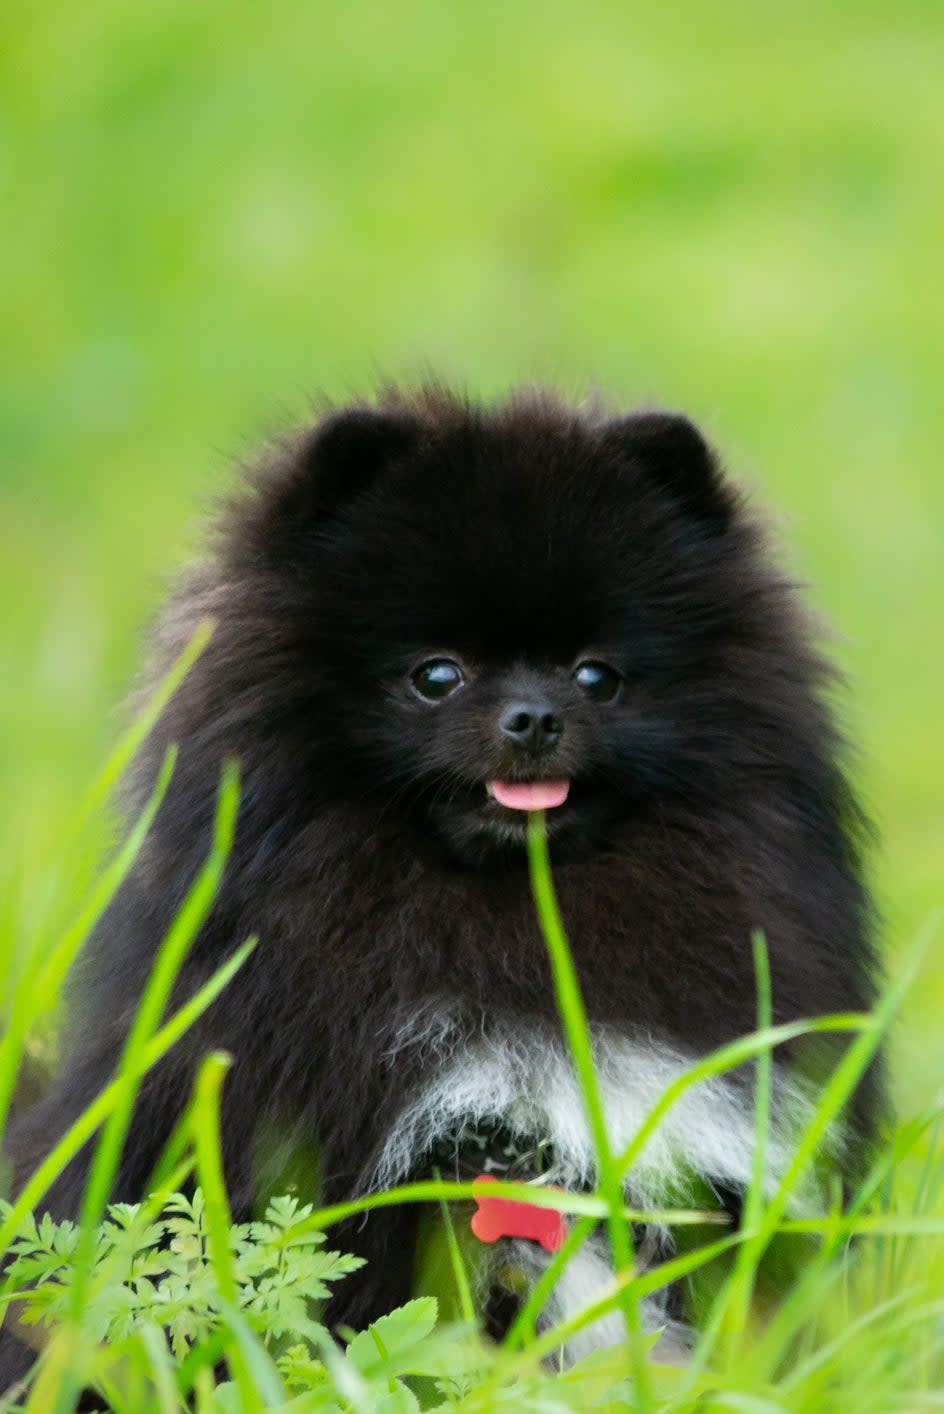 A small black Pomeranian dog sitting on the grass with its tongue out, looking towards the camera